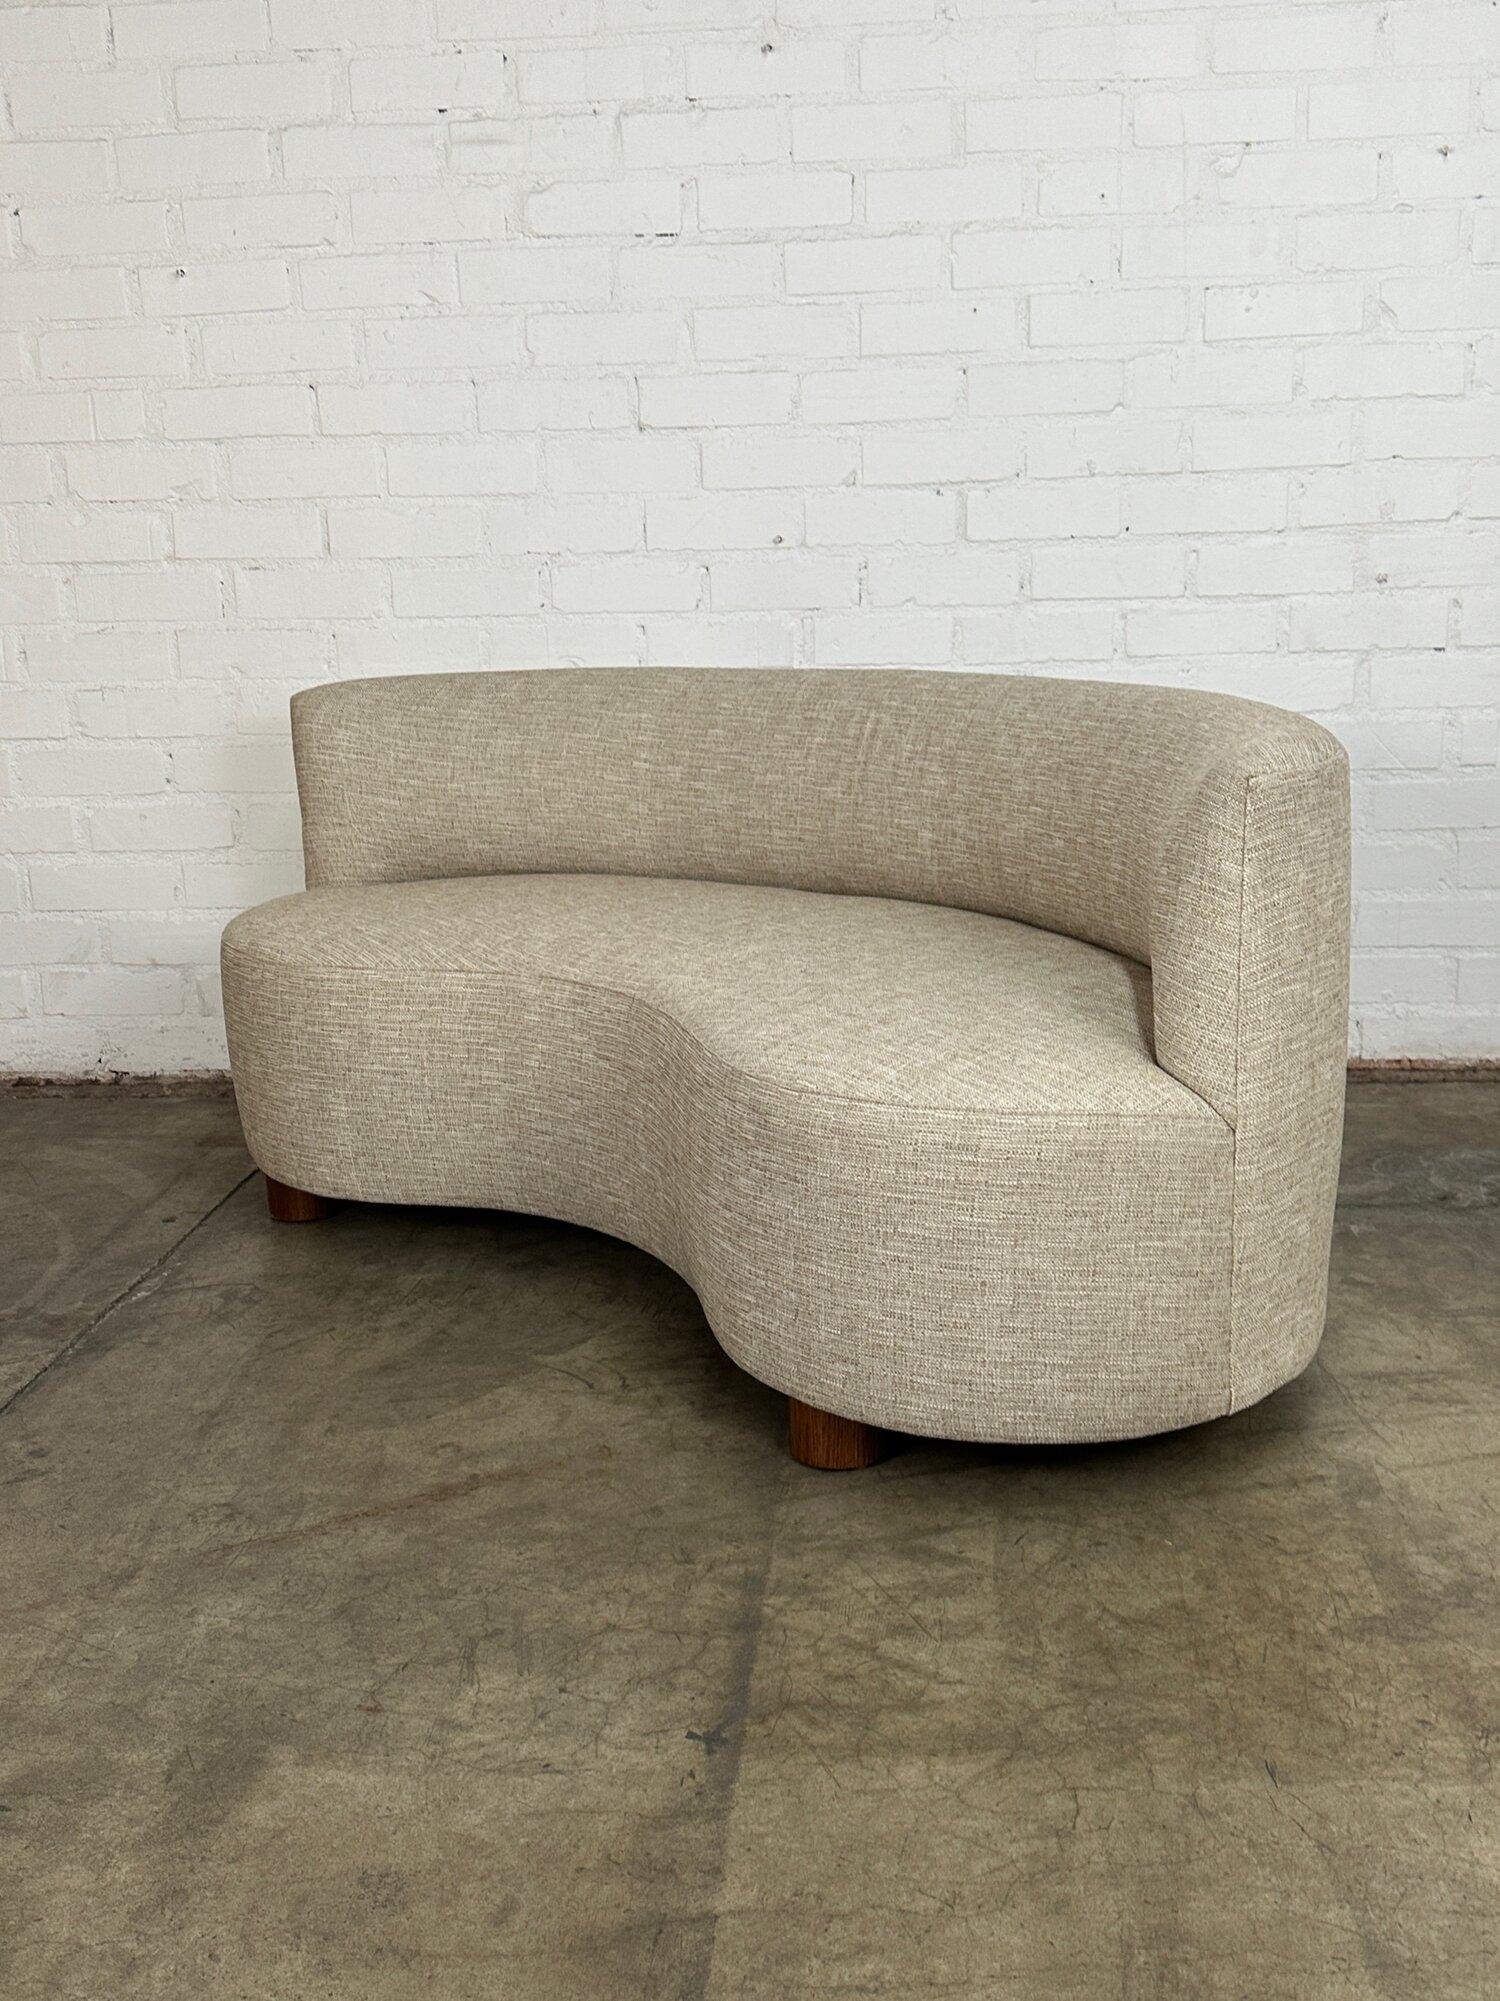 Fabric One of One Handcrafted Kidney Sofa For Sale